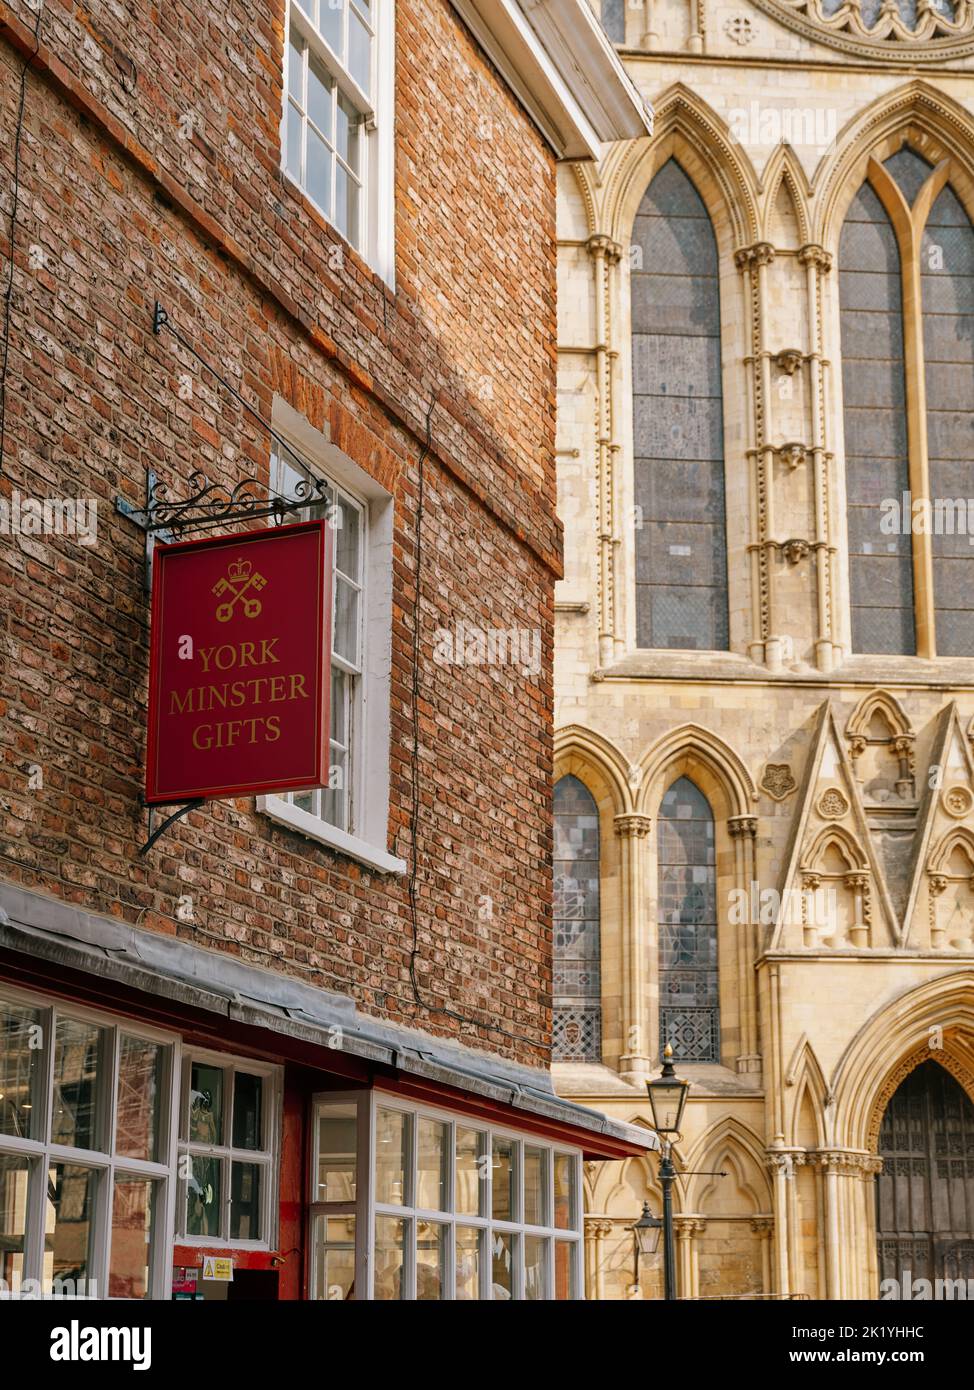 York Minster / York cathedral in the City of York, North Yorkshire, England, UK Stock Photo